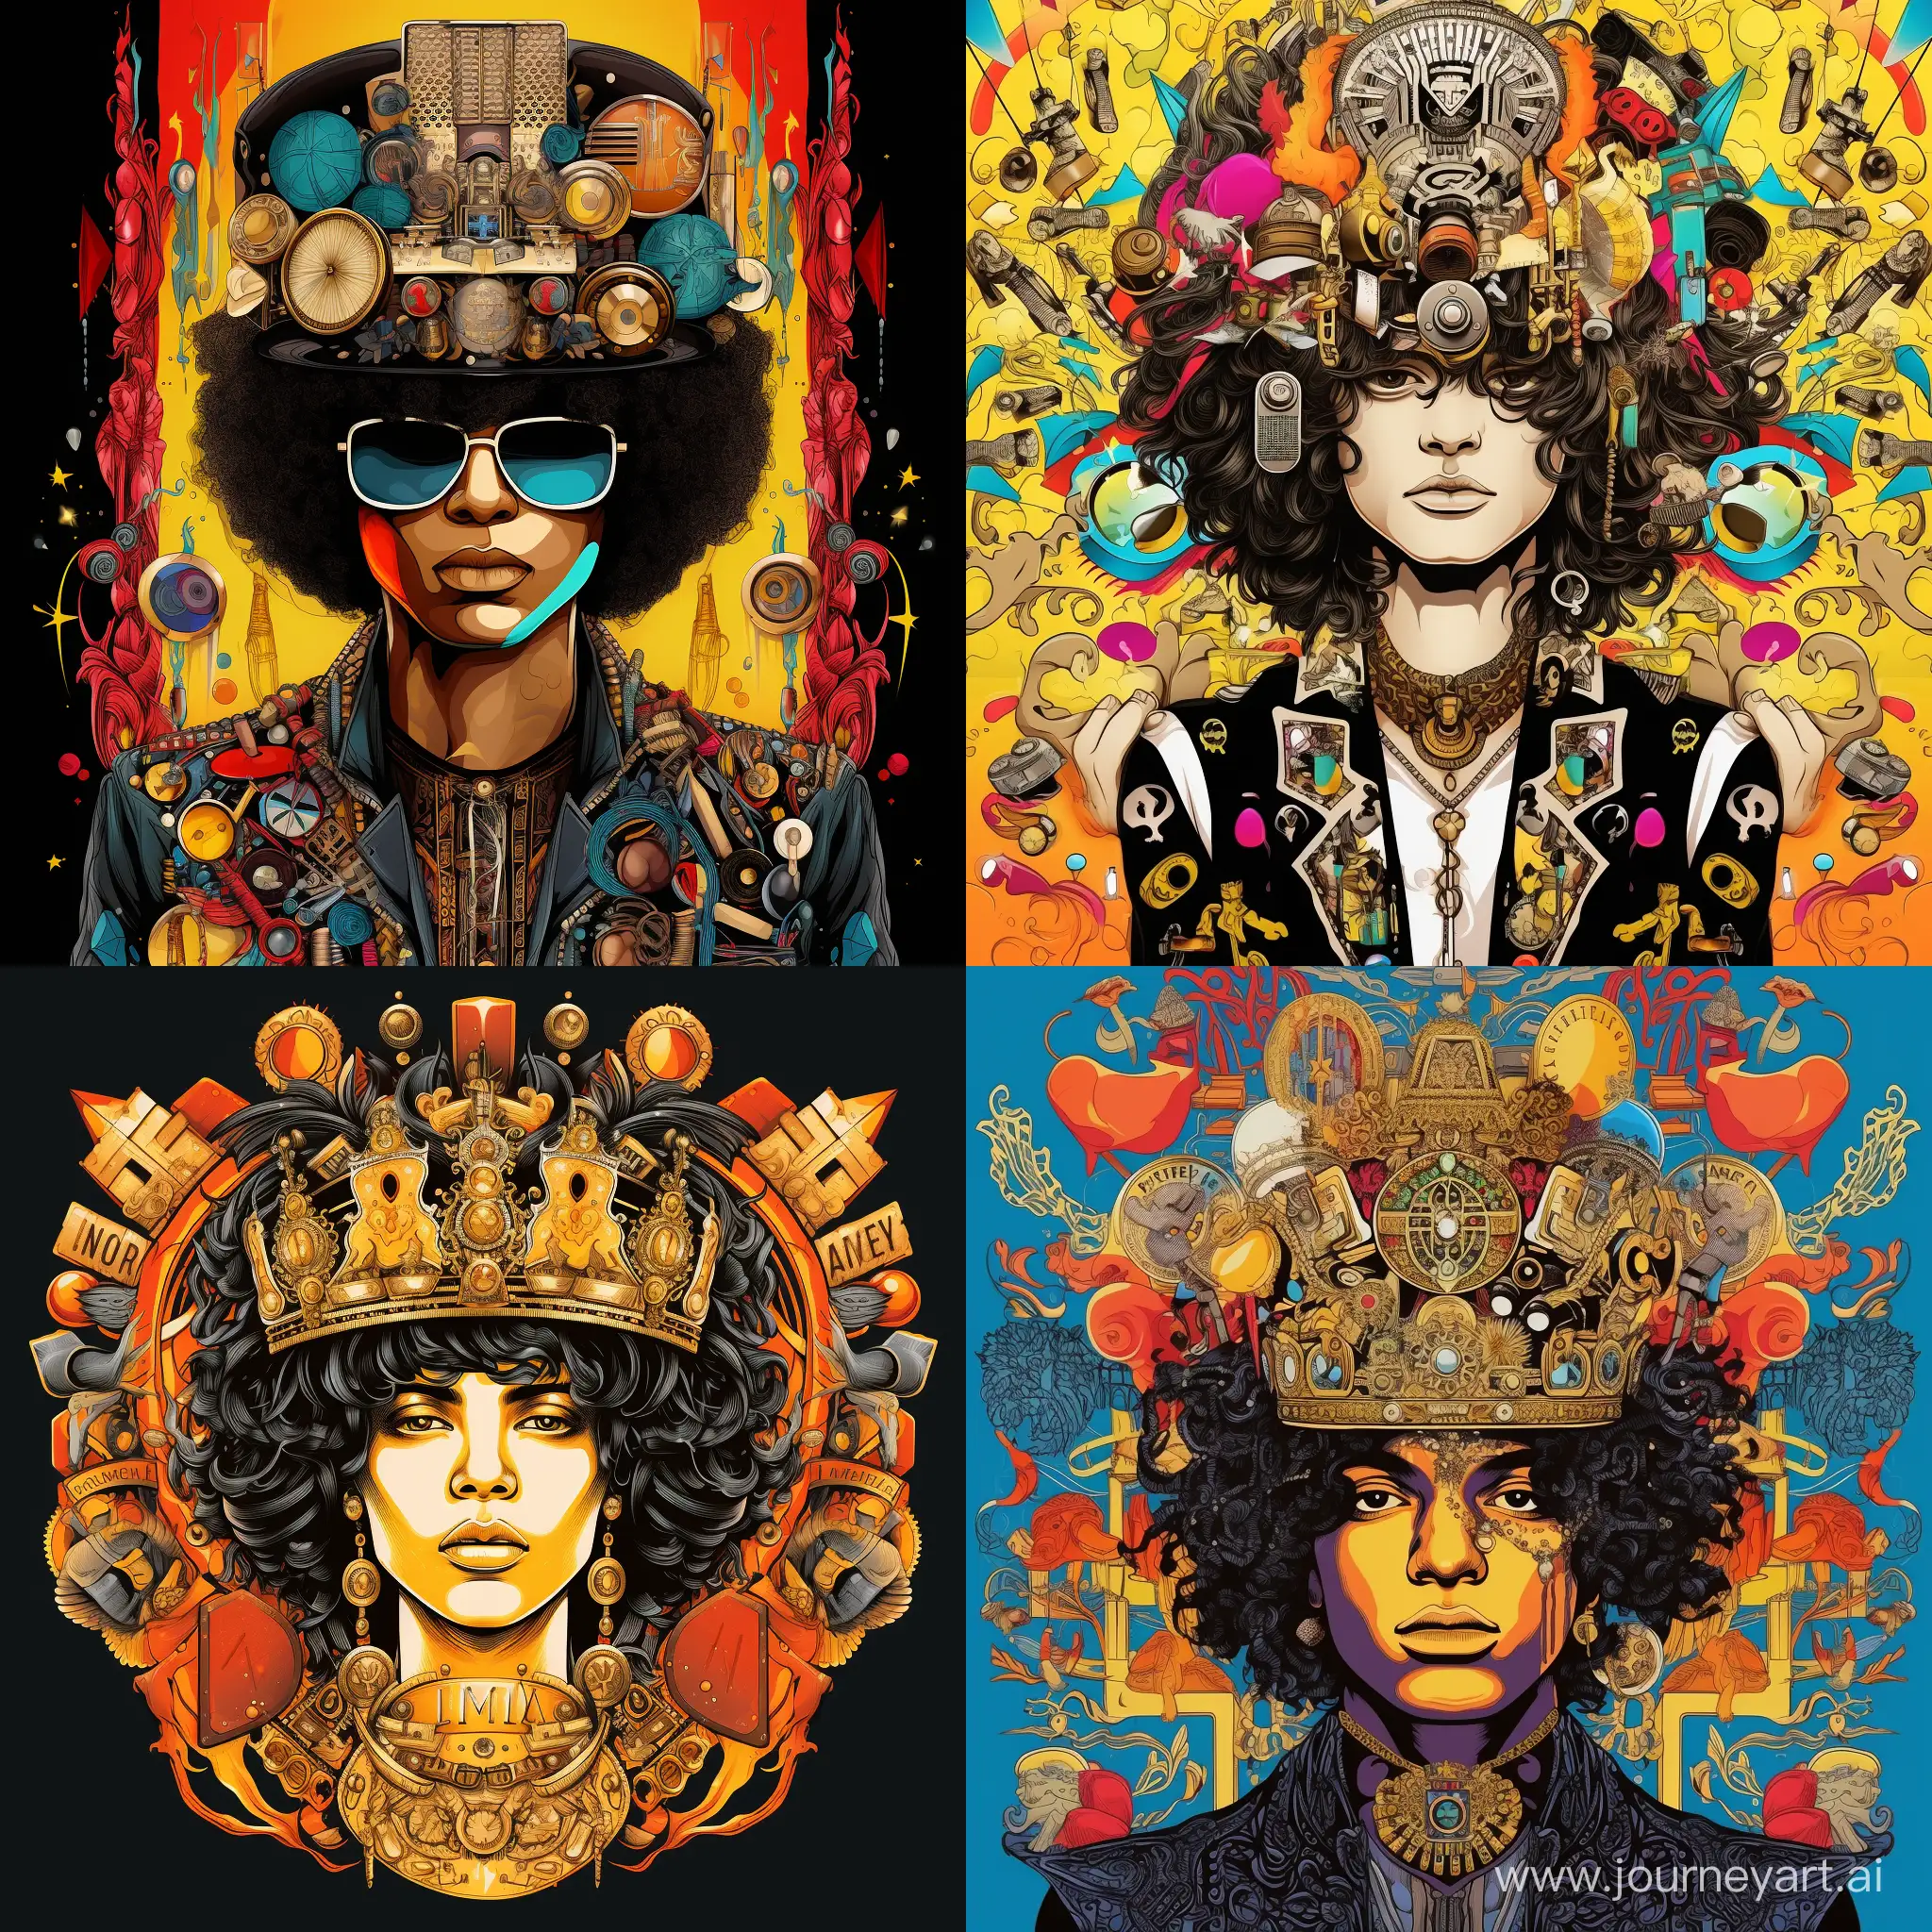 Young-Michael-Jackson-with-Crown-in-Vibrant-Pop-Art-Portrait